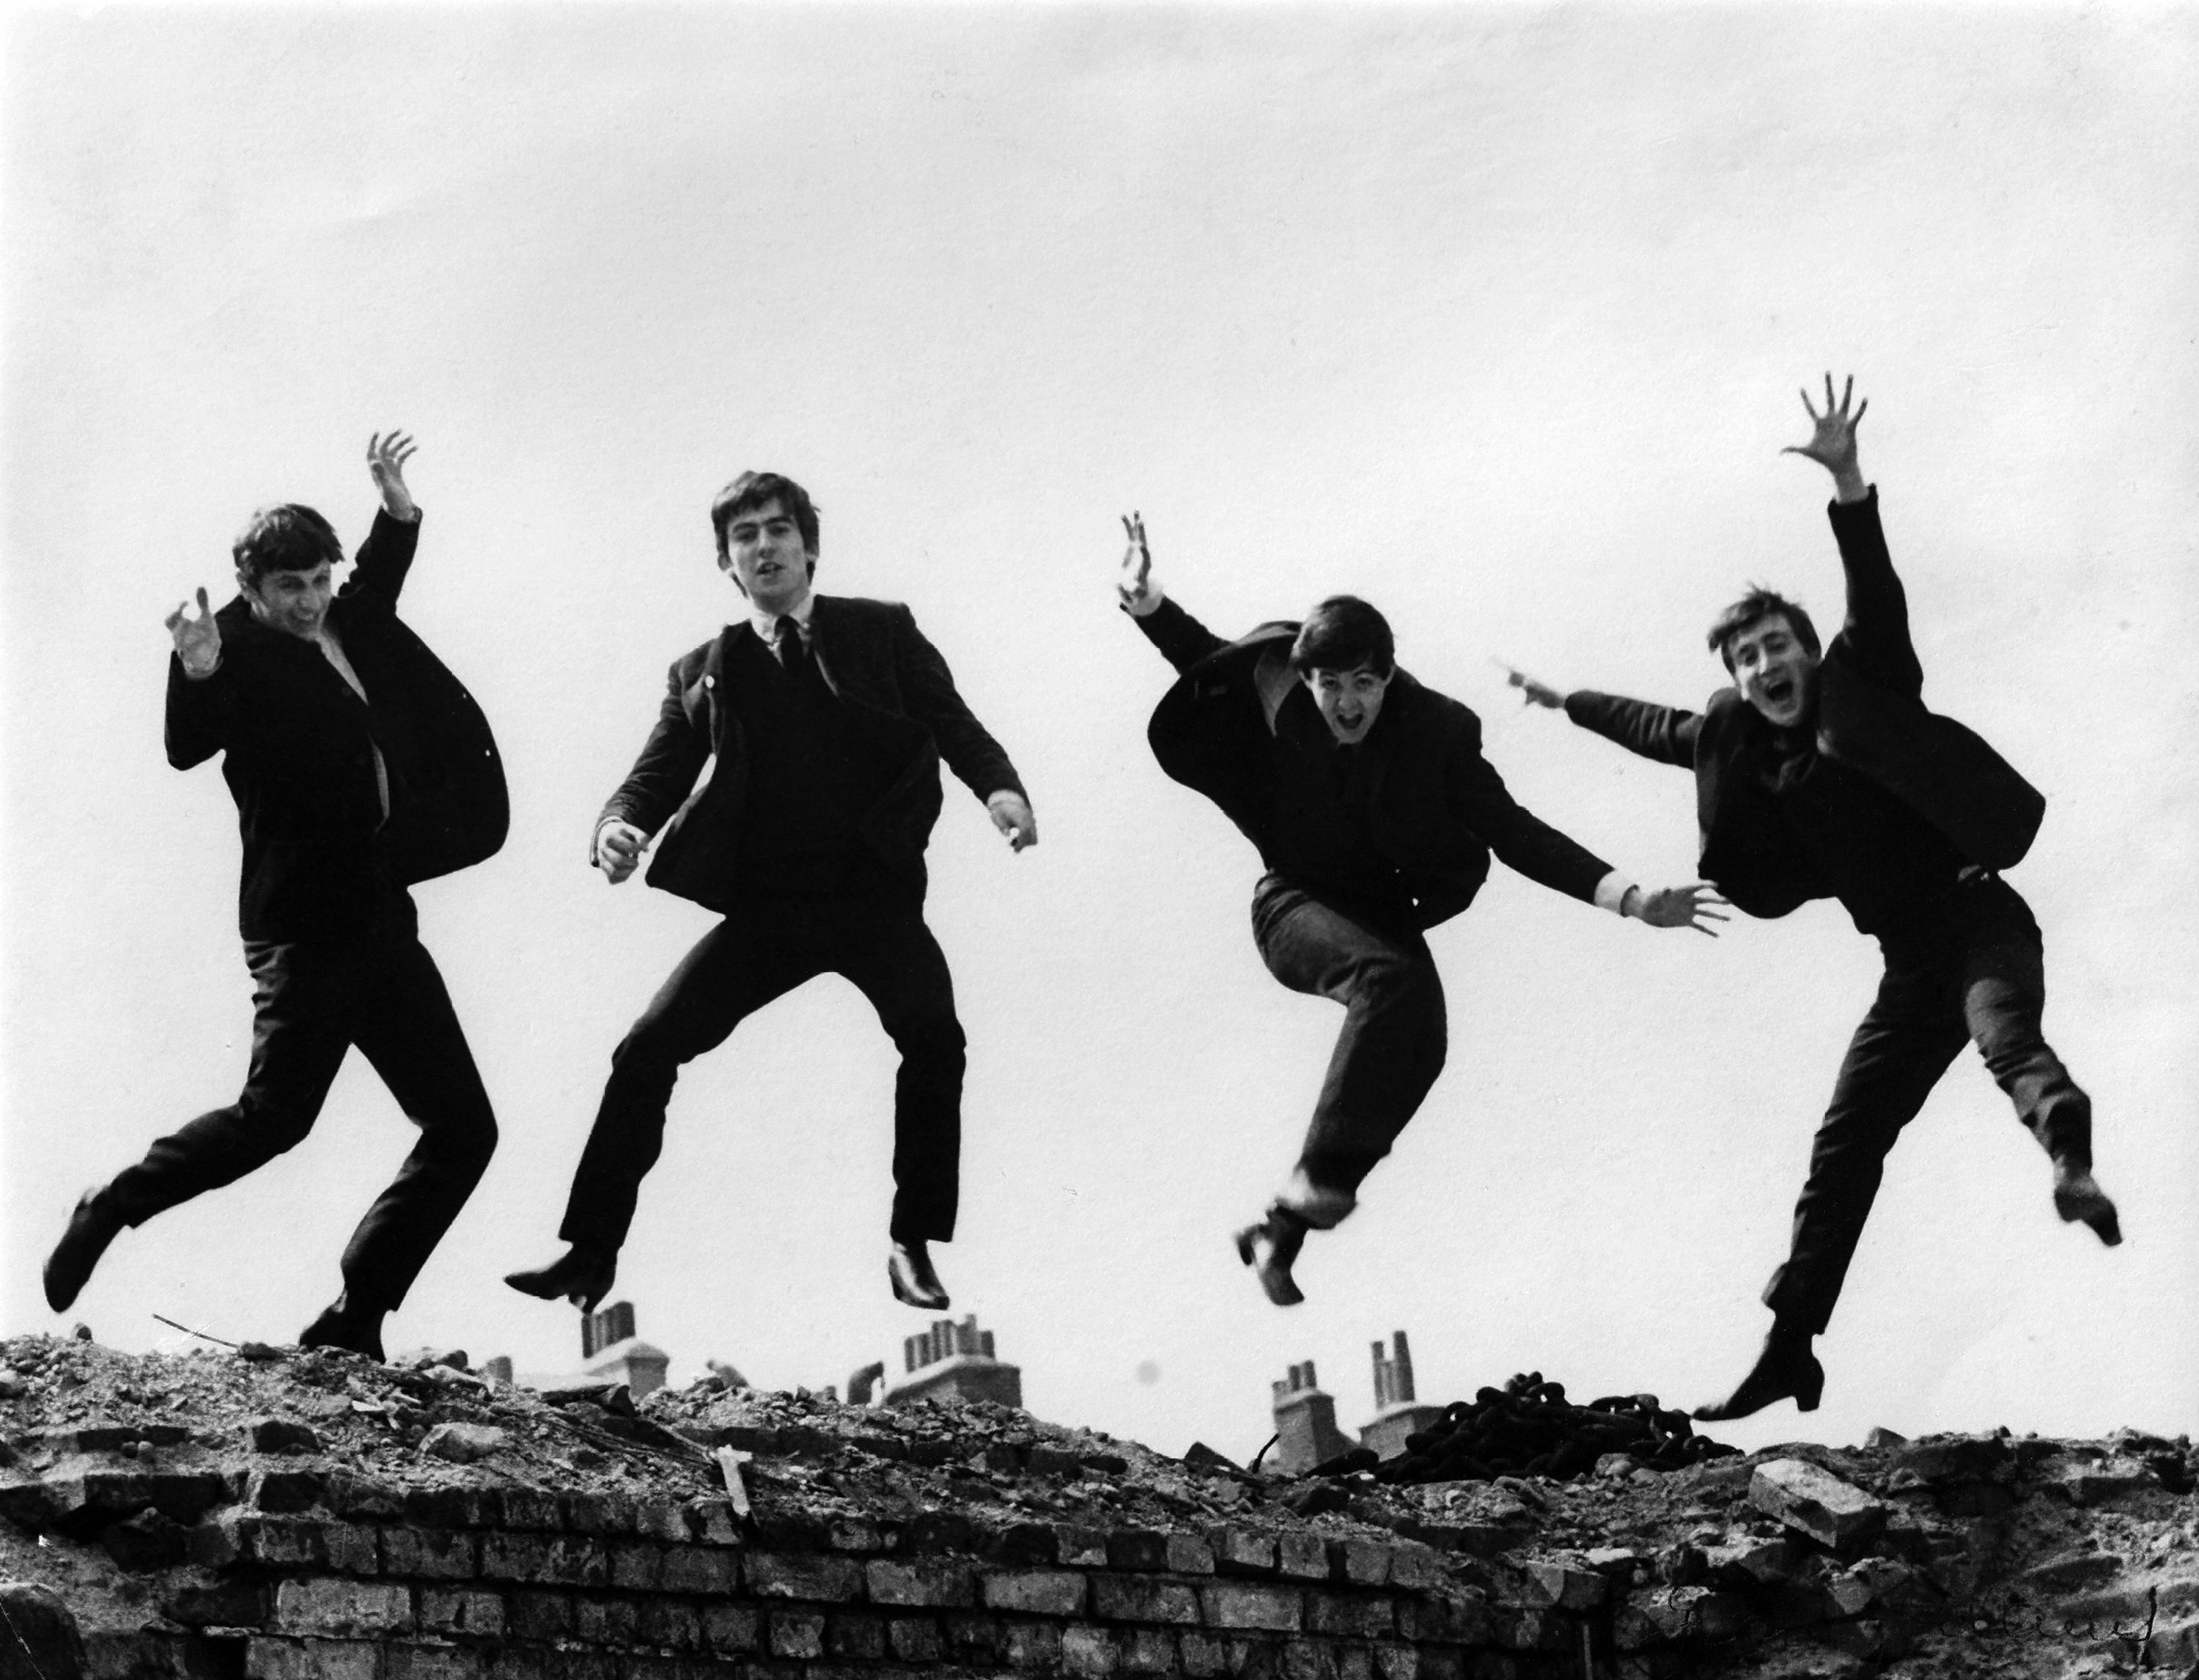 Photo of the Beatles, April 1963; L-R: Ringo Starr, George Harrison, Paul McCartney, John Lennon - posed, group shot - jumping on wall, Used on the Twist & Shout EP cover.